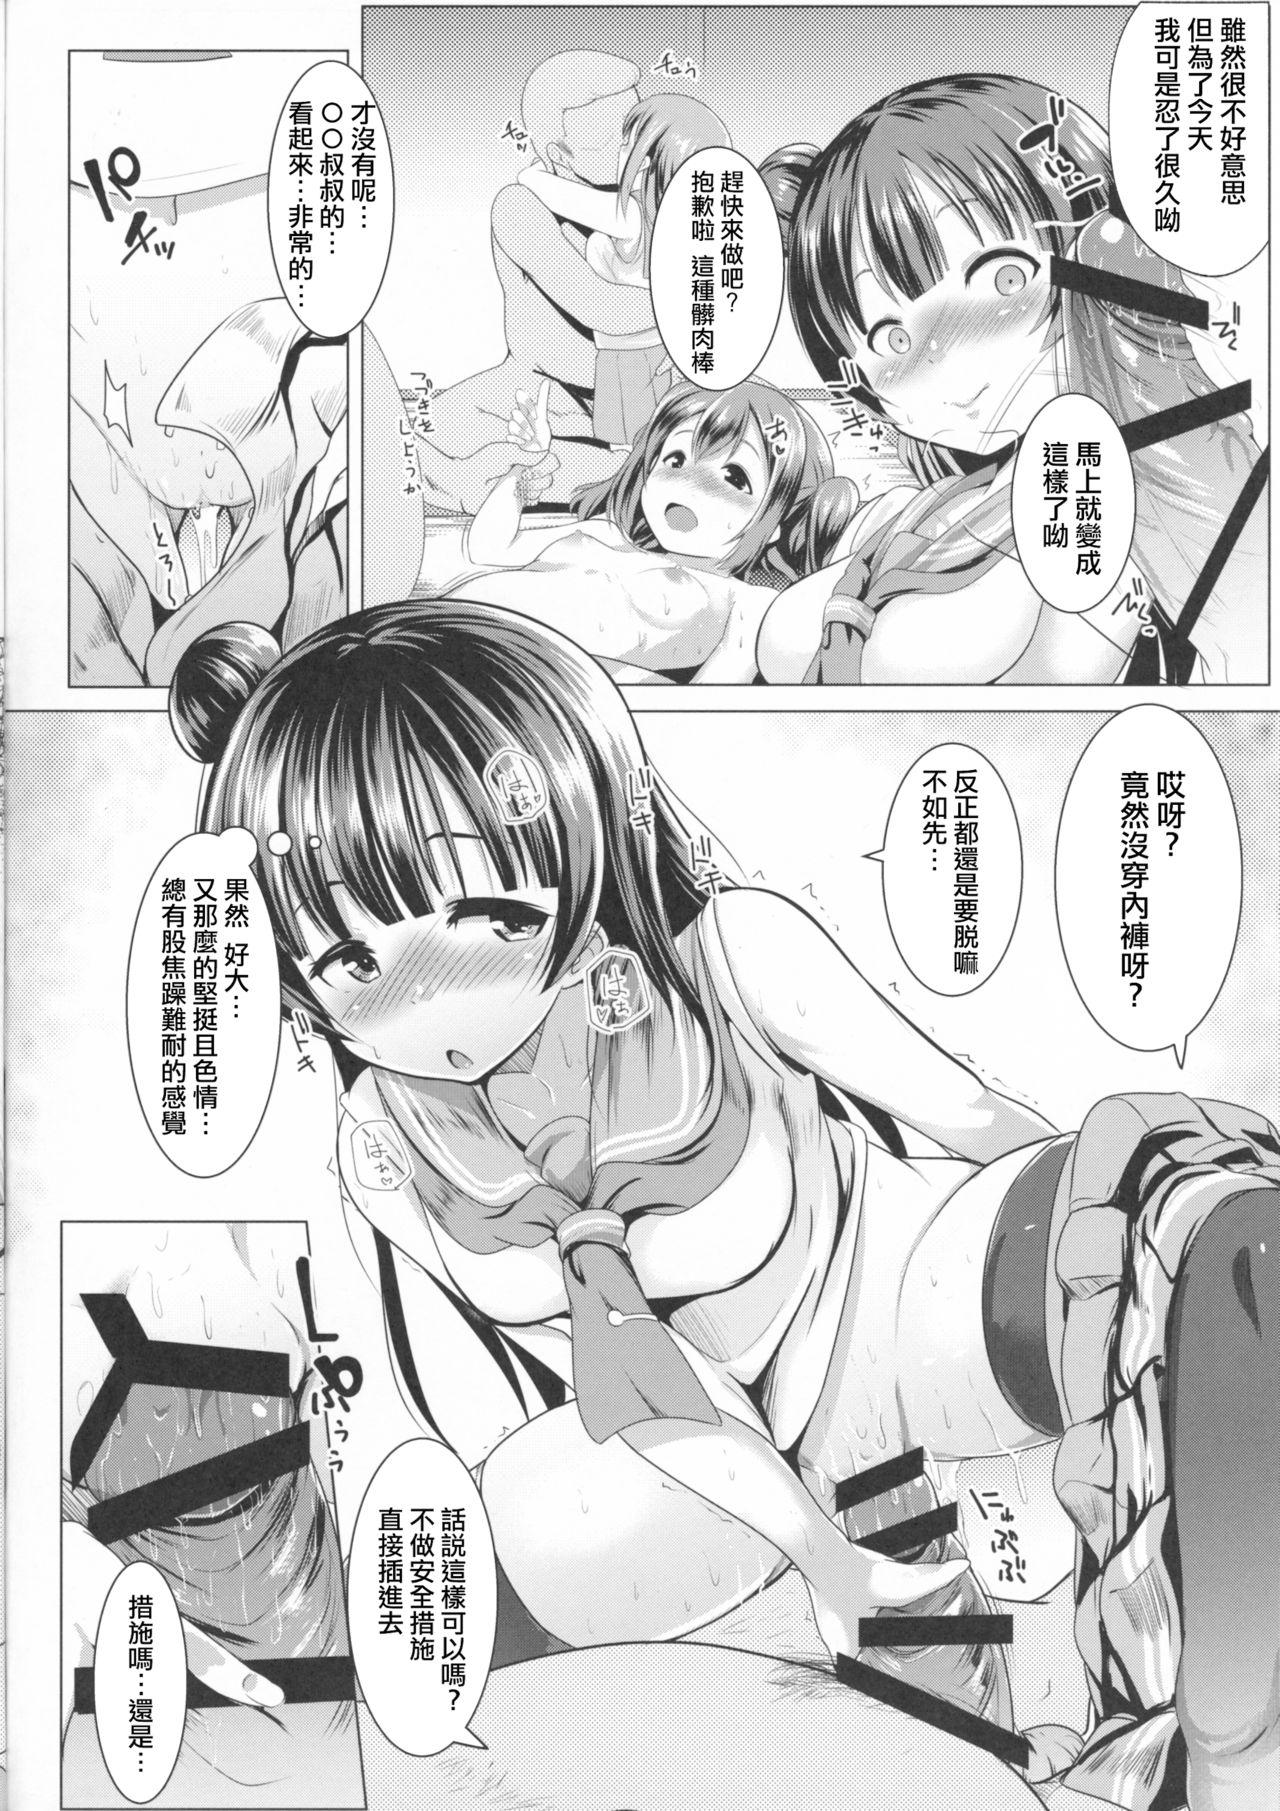 Gay Interracial SUMMER PROMISCUITY with Yoshimaruby - Love live sunshine Pounded - Page 7